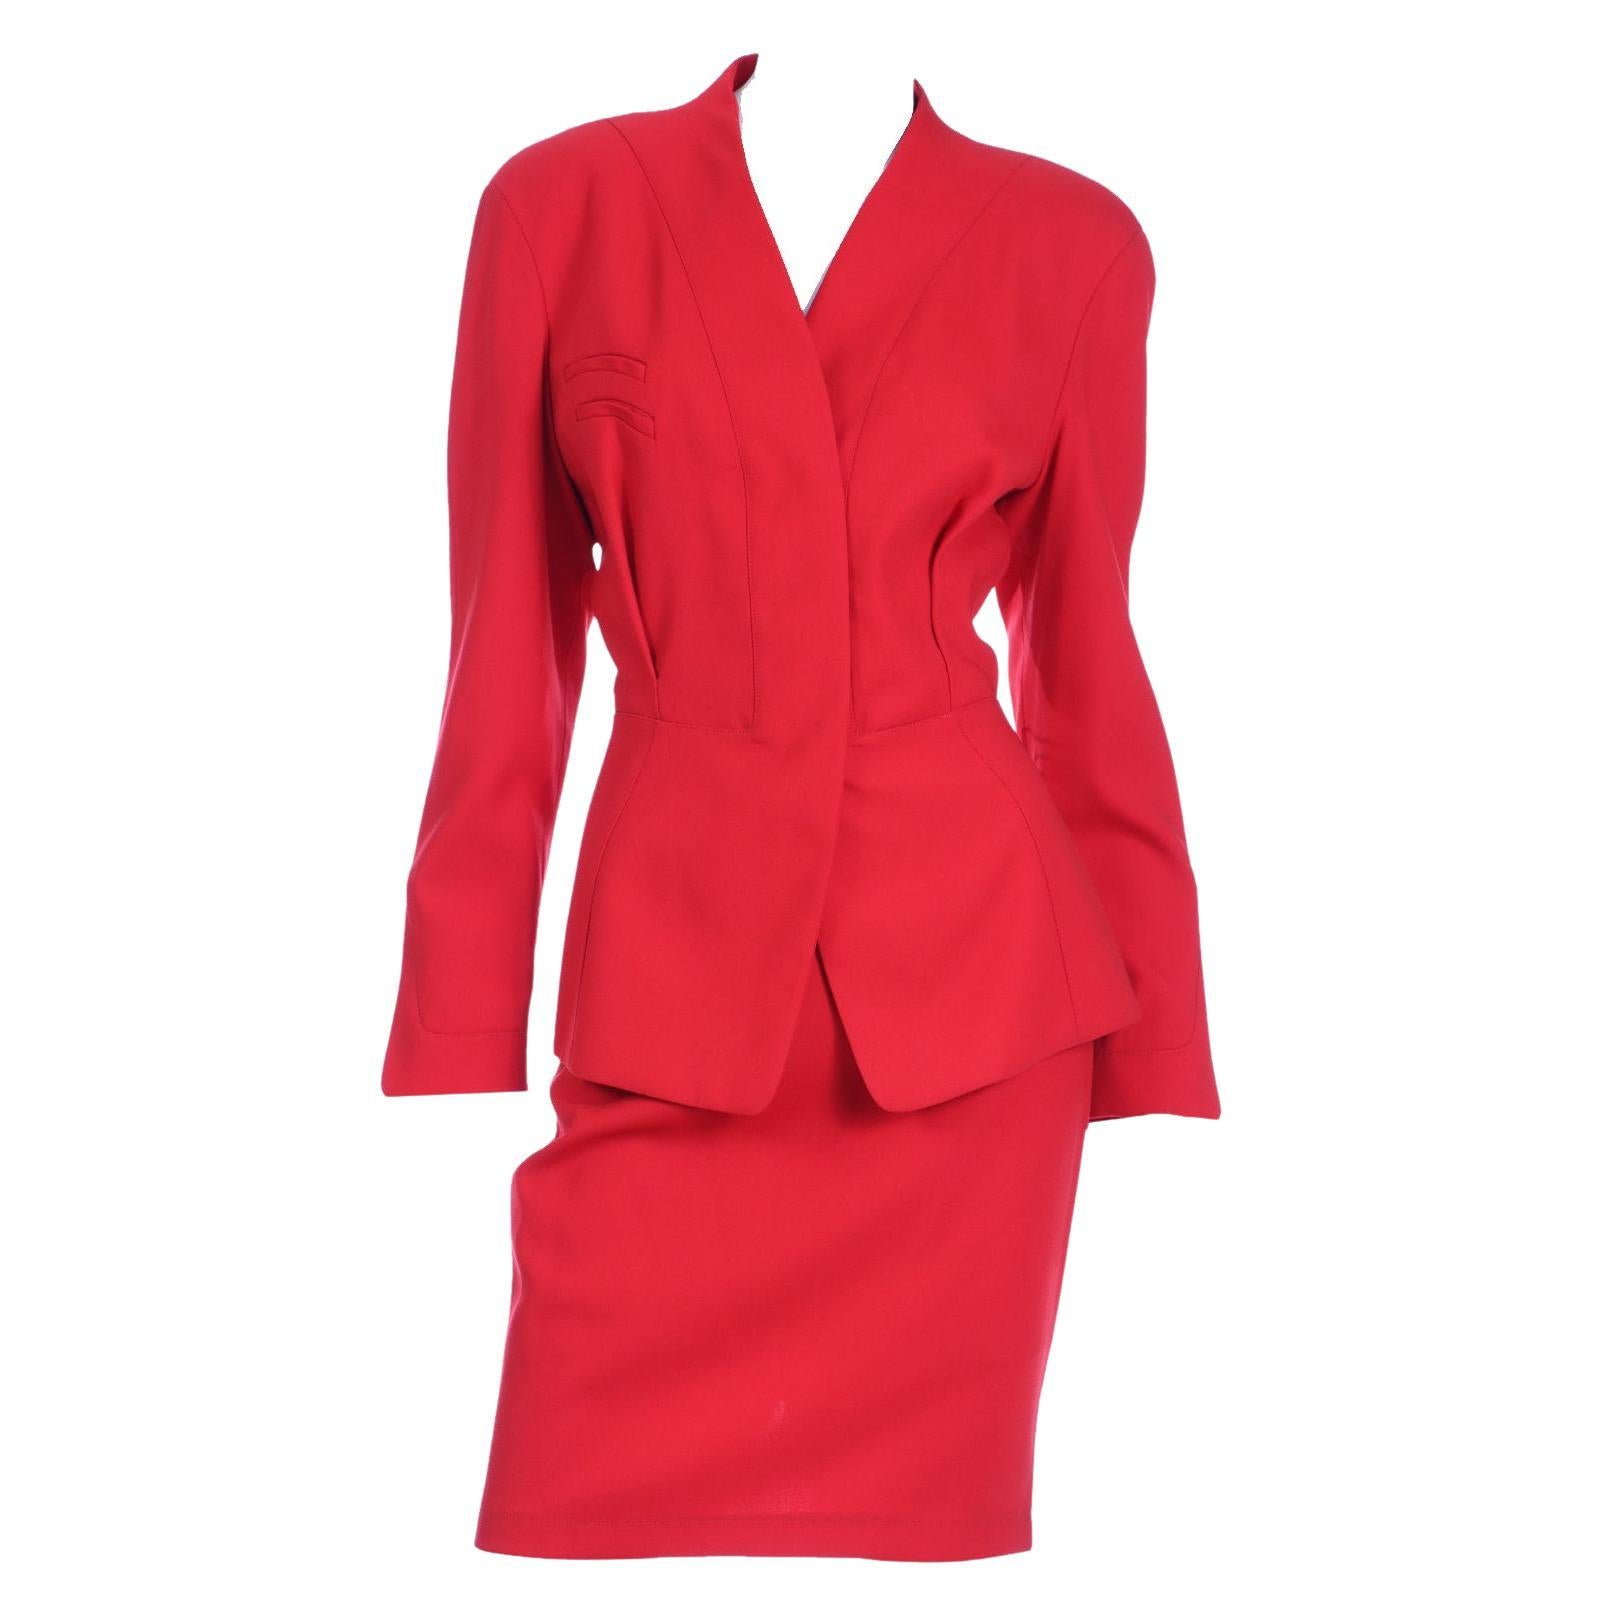 Vintage Red Thierry Mugler Jacket and Skirt Suit Deadstock w Tags